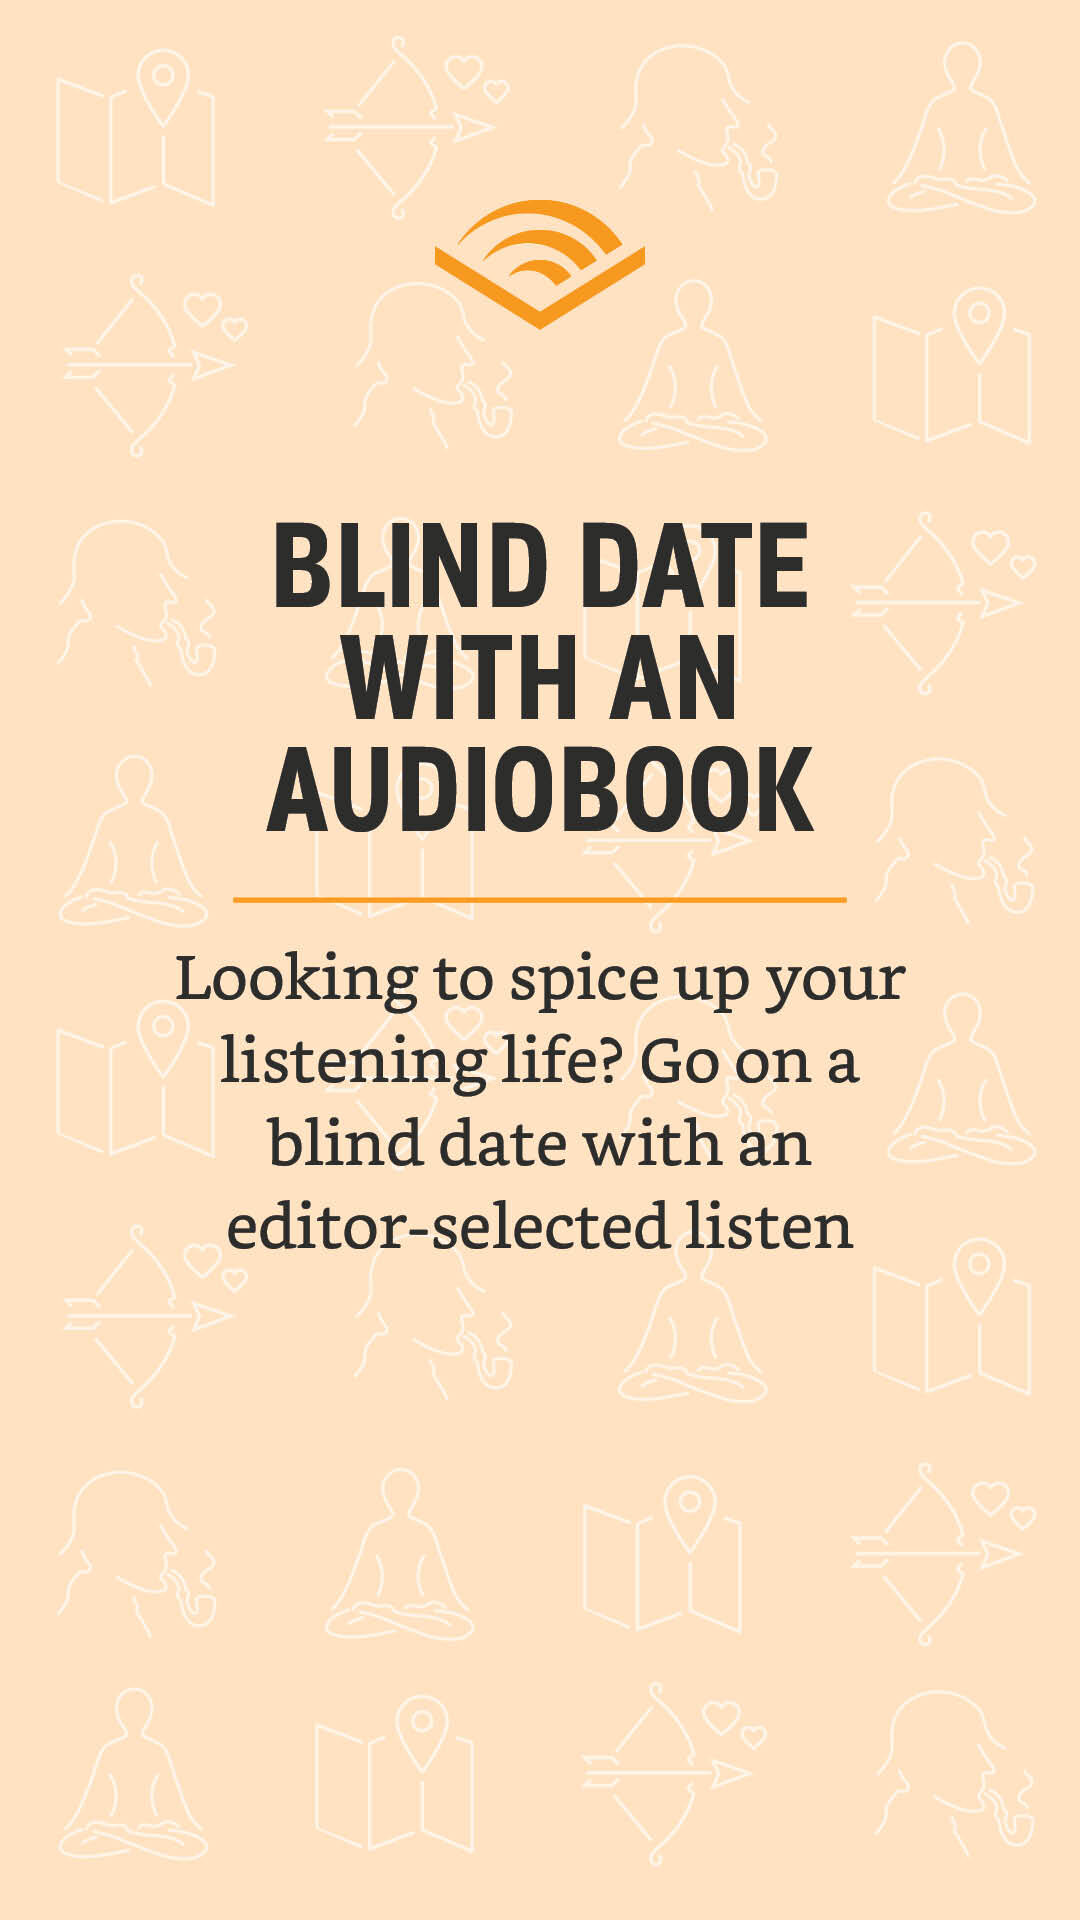 Audible - Blind Date with Audible - Insta Cover Slide.jpg